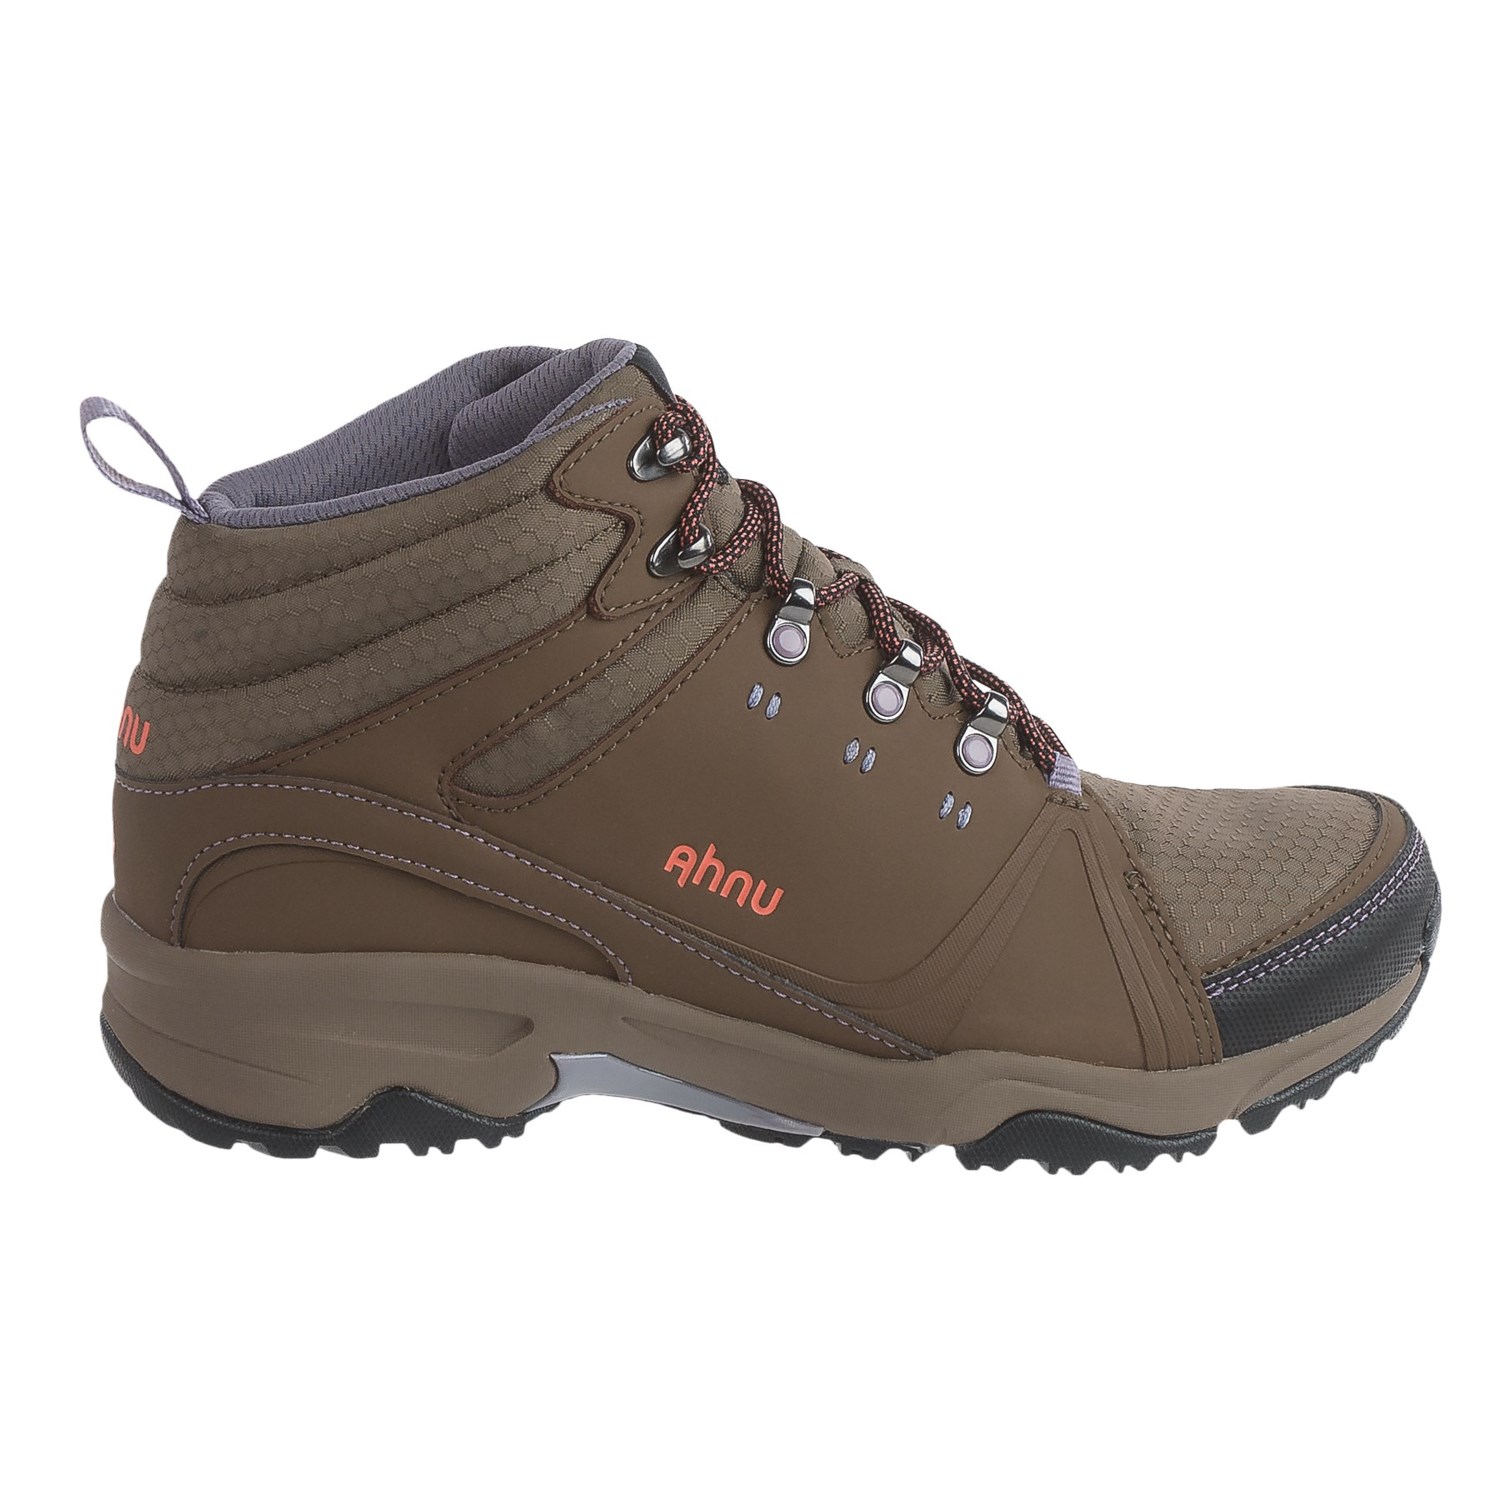 Ahnu Alamere Mid Leather Hiking Boots (For Women) - Save 54%